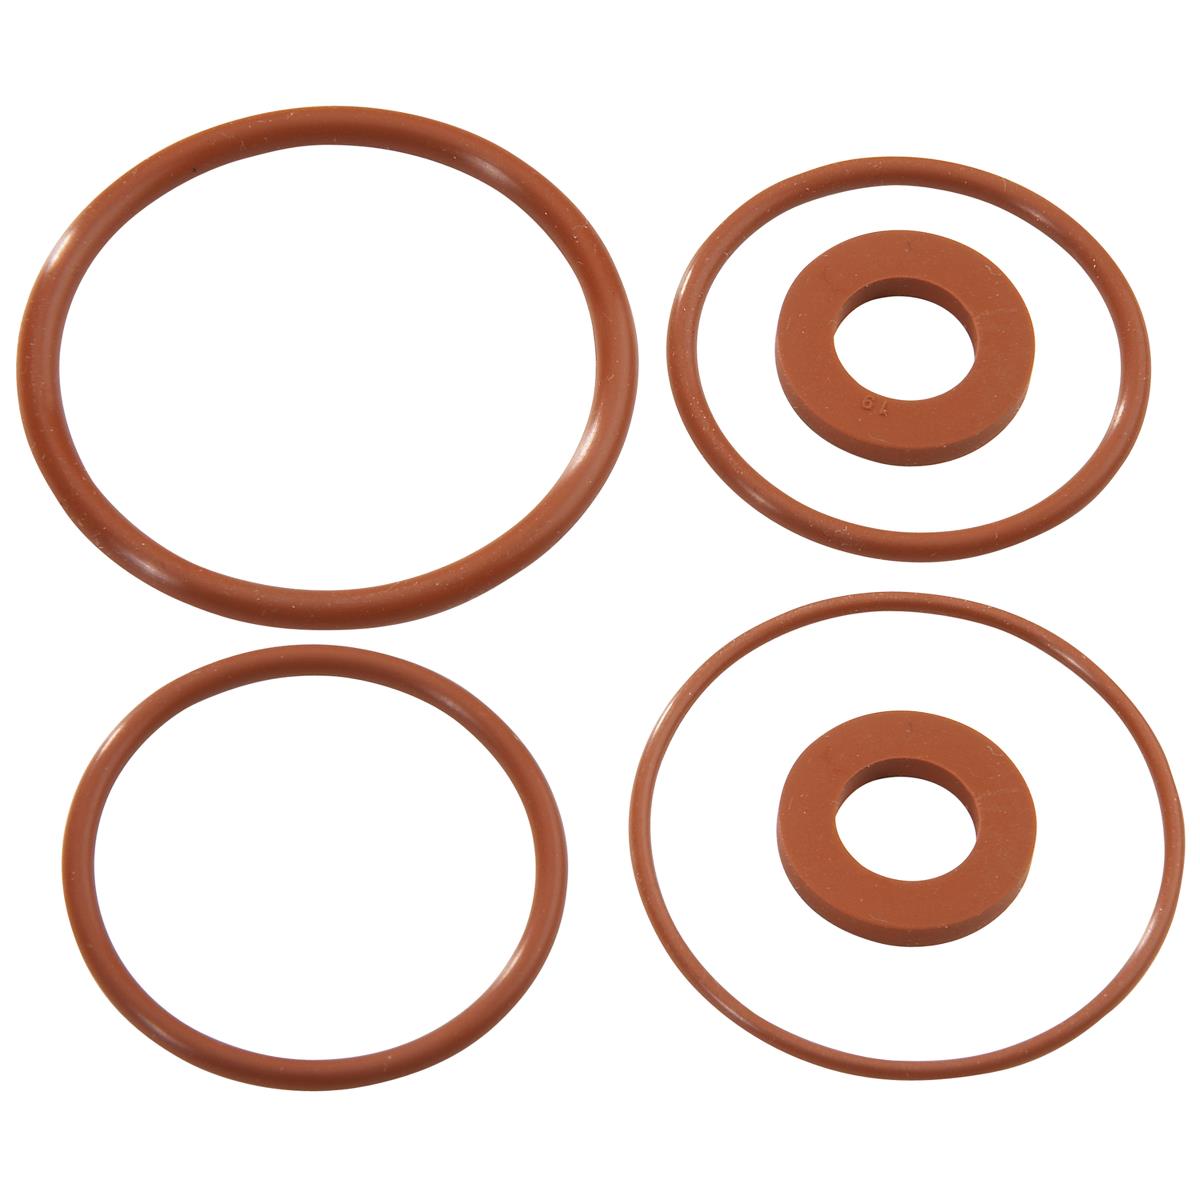 1/2"- 3/4" Febco FRK 850/860/880-RC3 1st & 2nd Check Rubber Parts Repair Kit